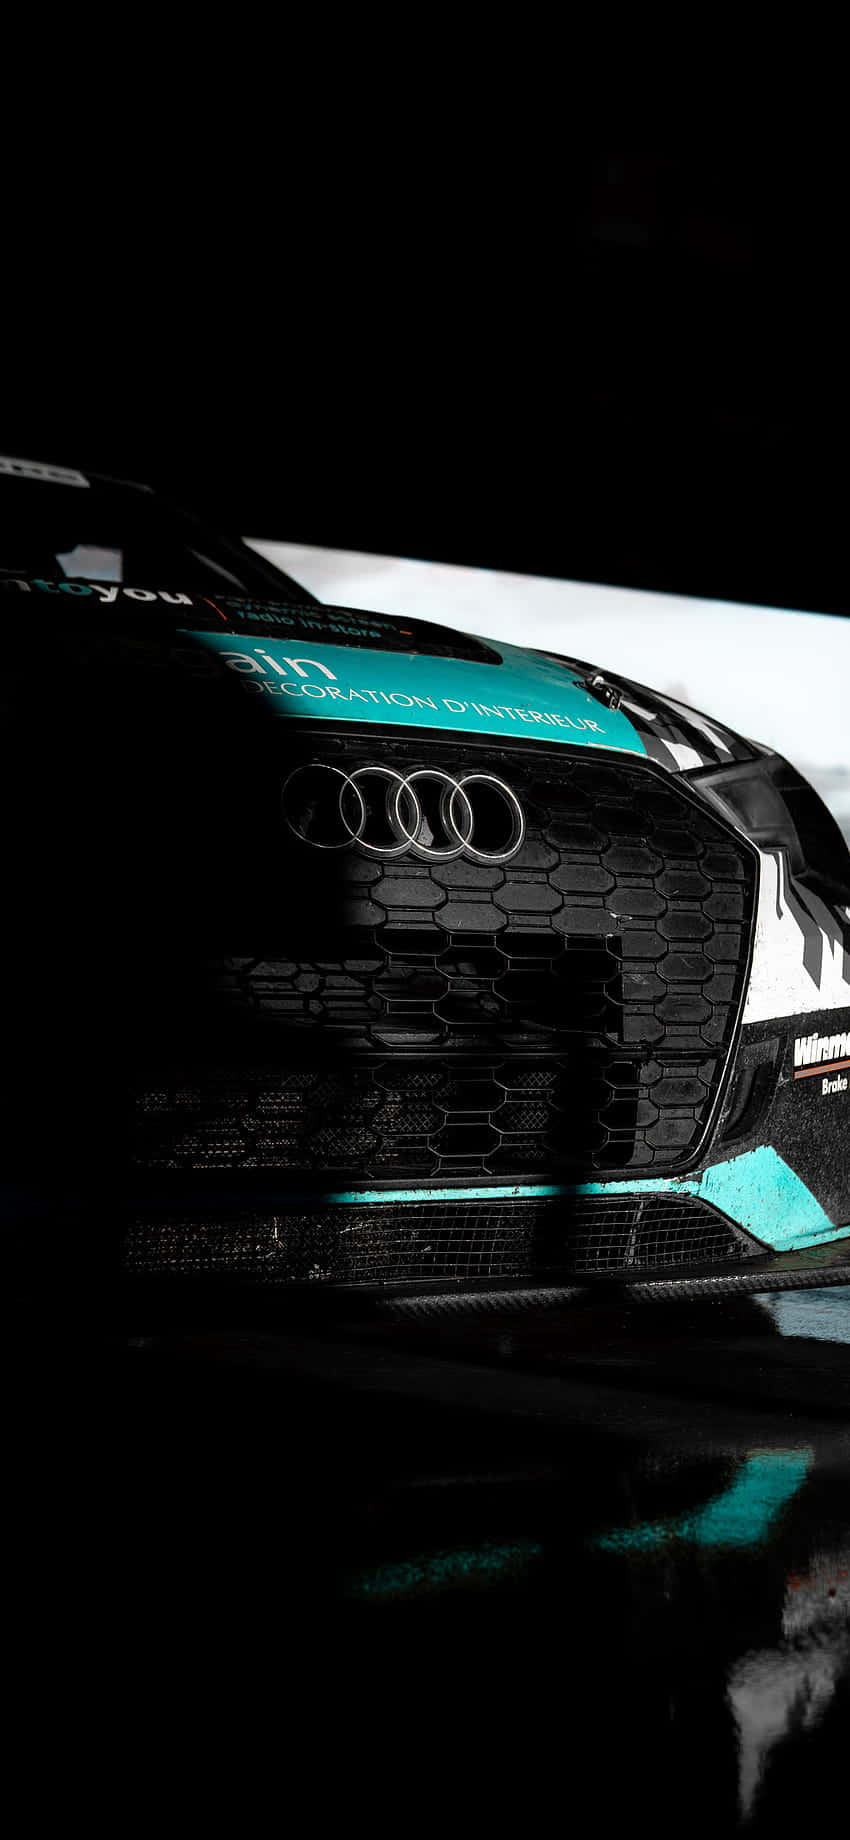 Get behind the wheel of the latest Audi Iphone Wallpaper